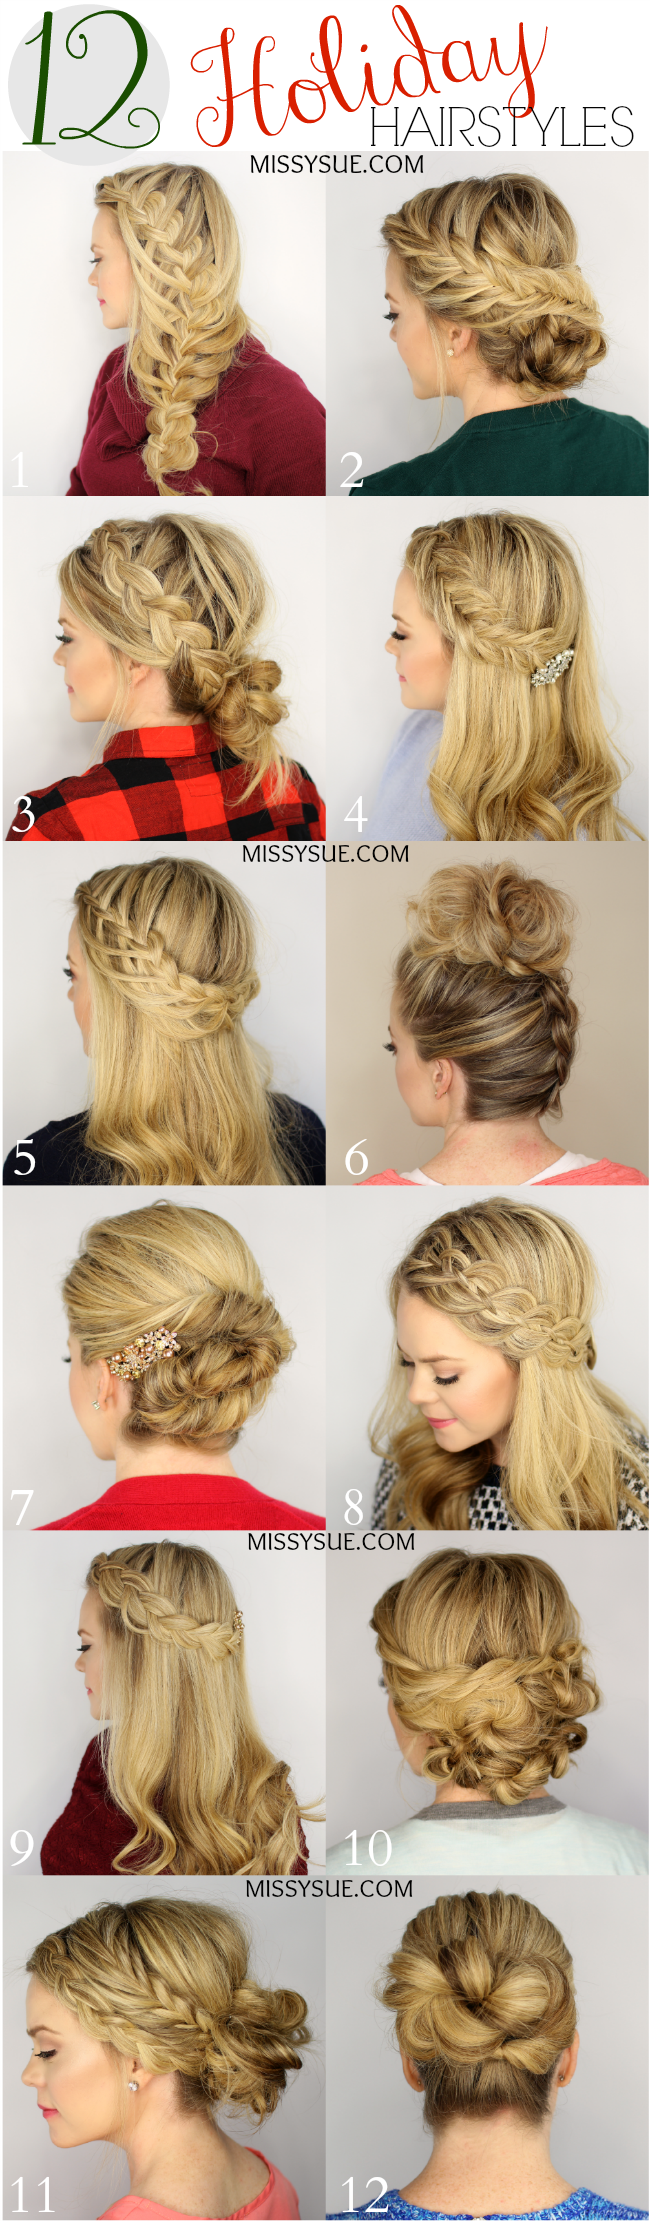 holiday and event hair